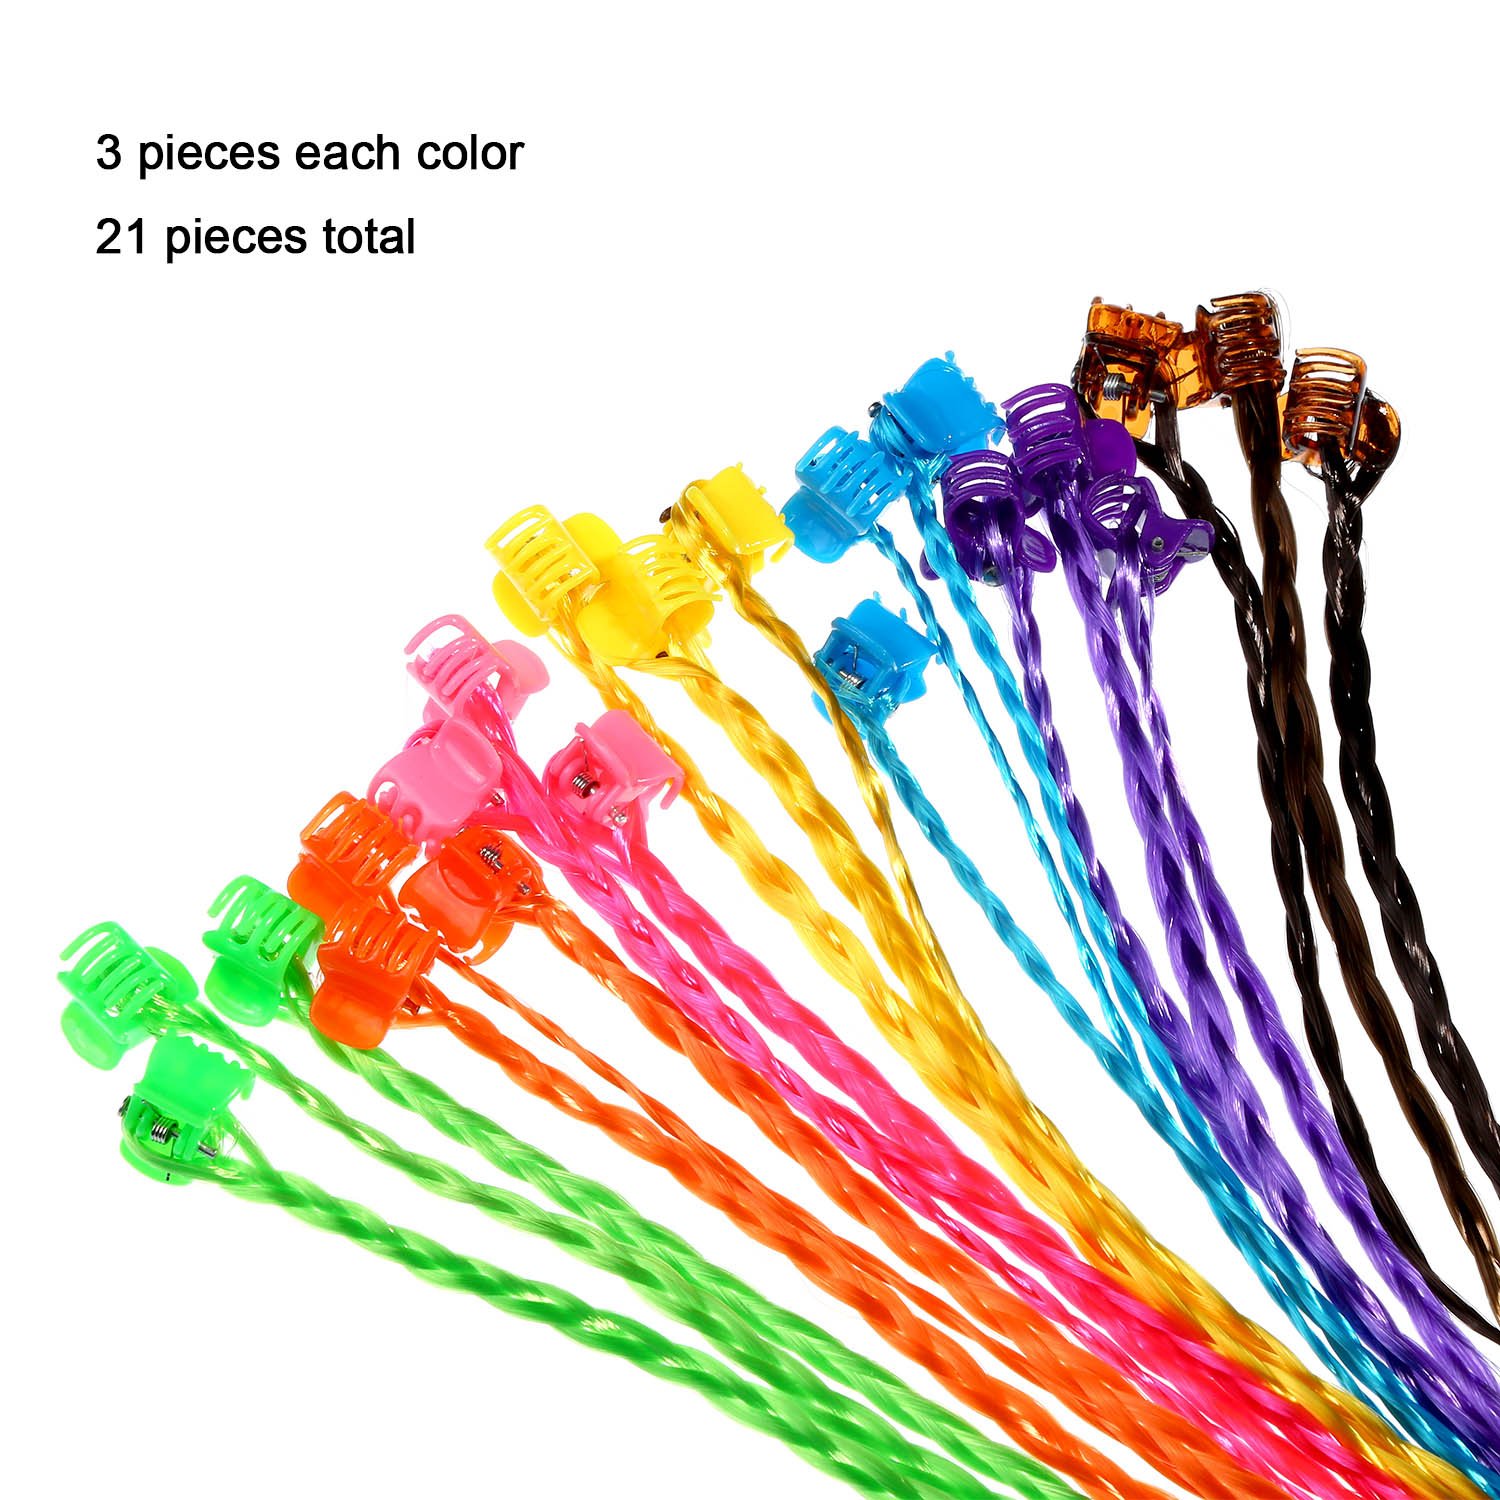 Bememo 21 Pieces Colored Braids Hair Extensions with Clip Snaps Rainbow Braided Kids Hair Extensions Hair Accessories for Children Performance Kids Girls Halloween Cosplay Party Dress up()